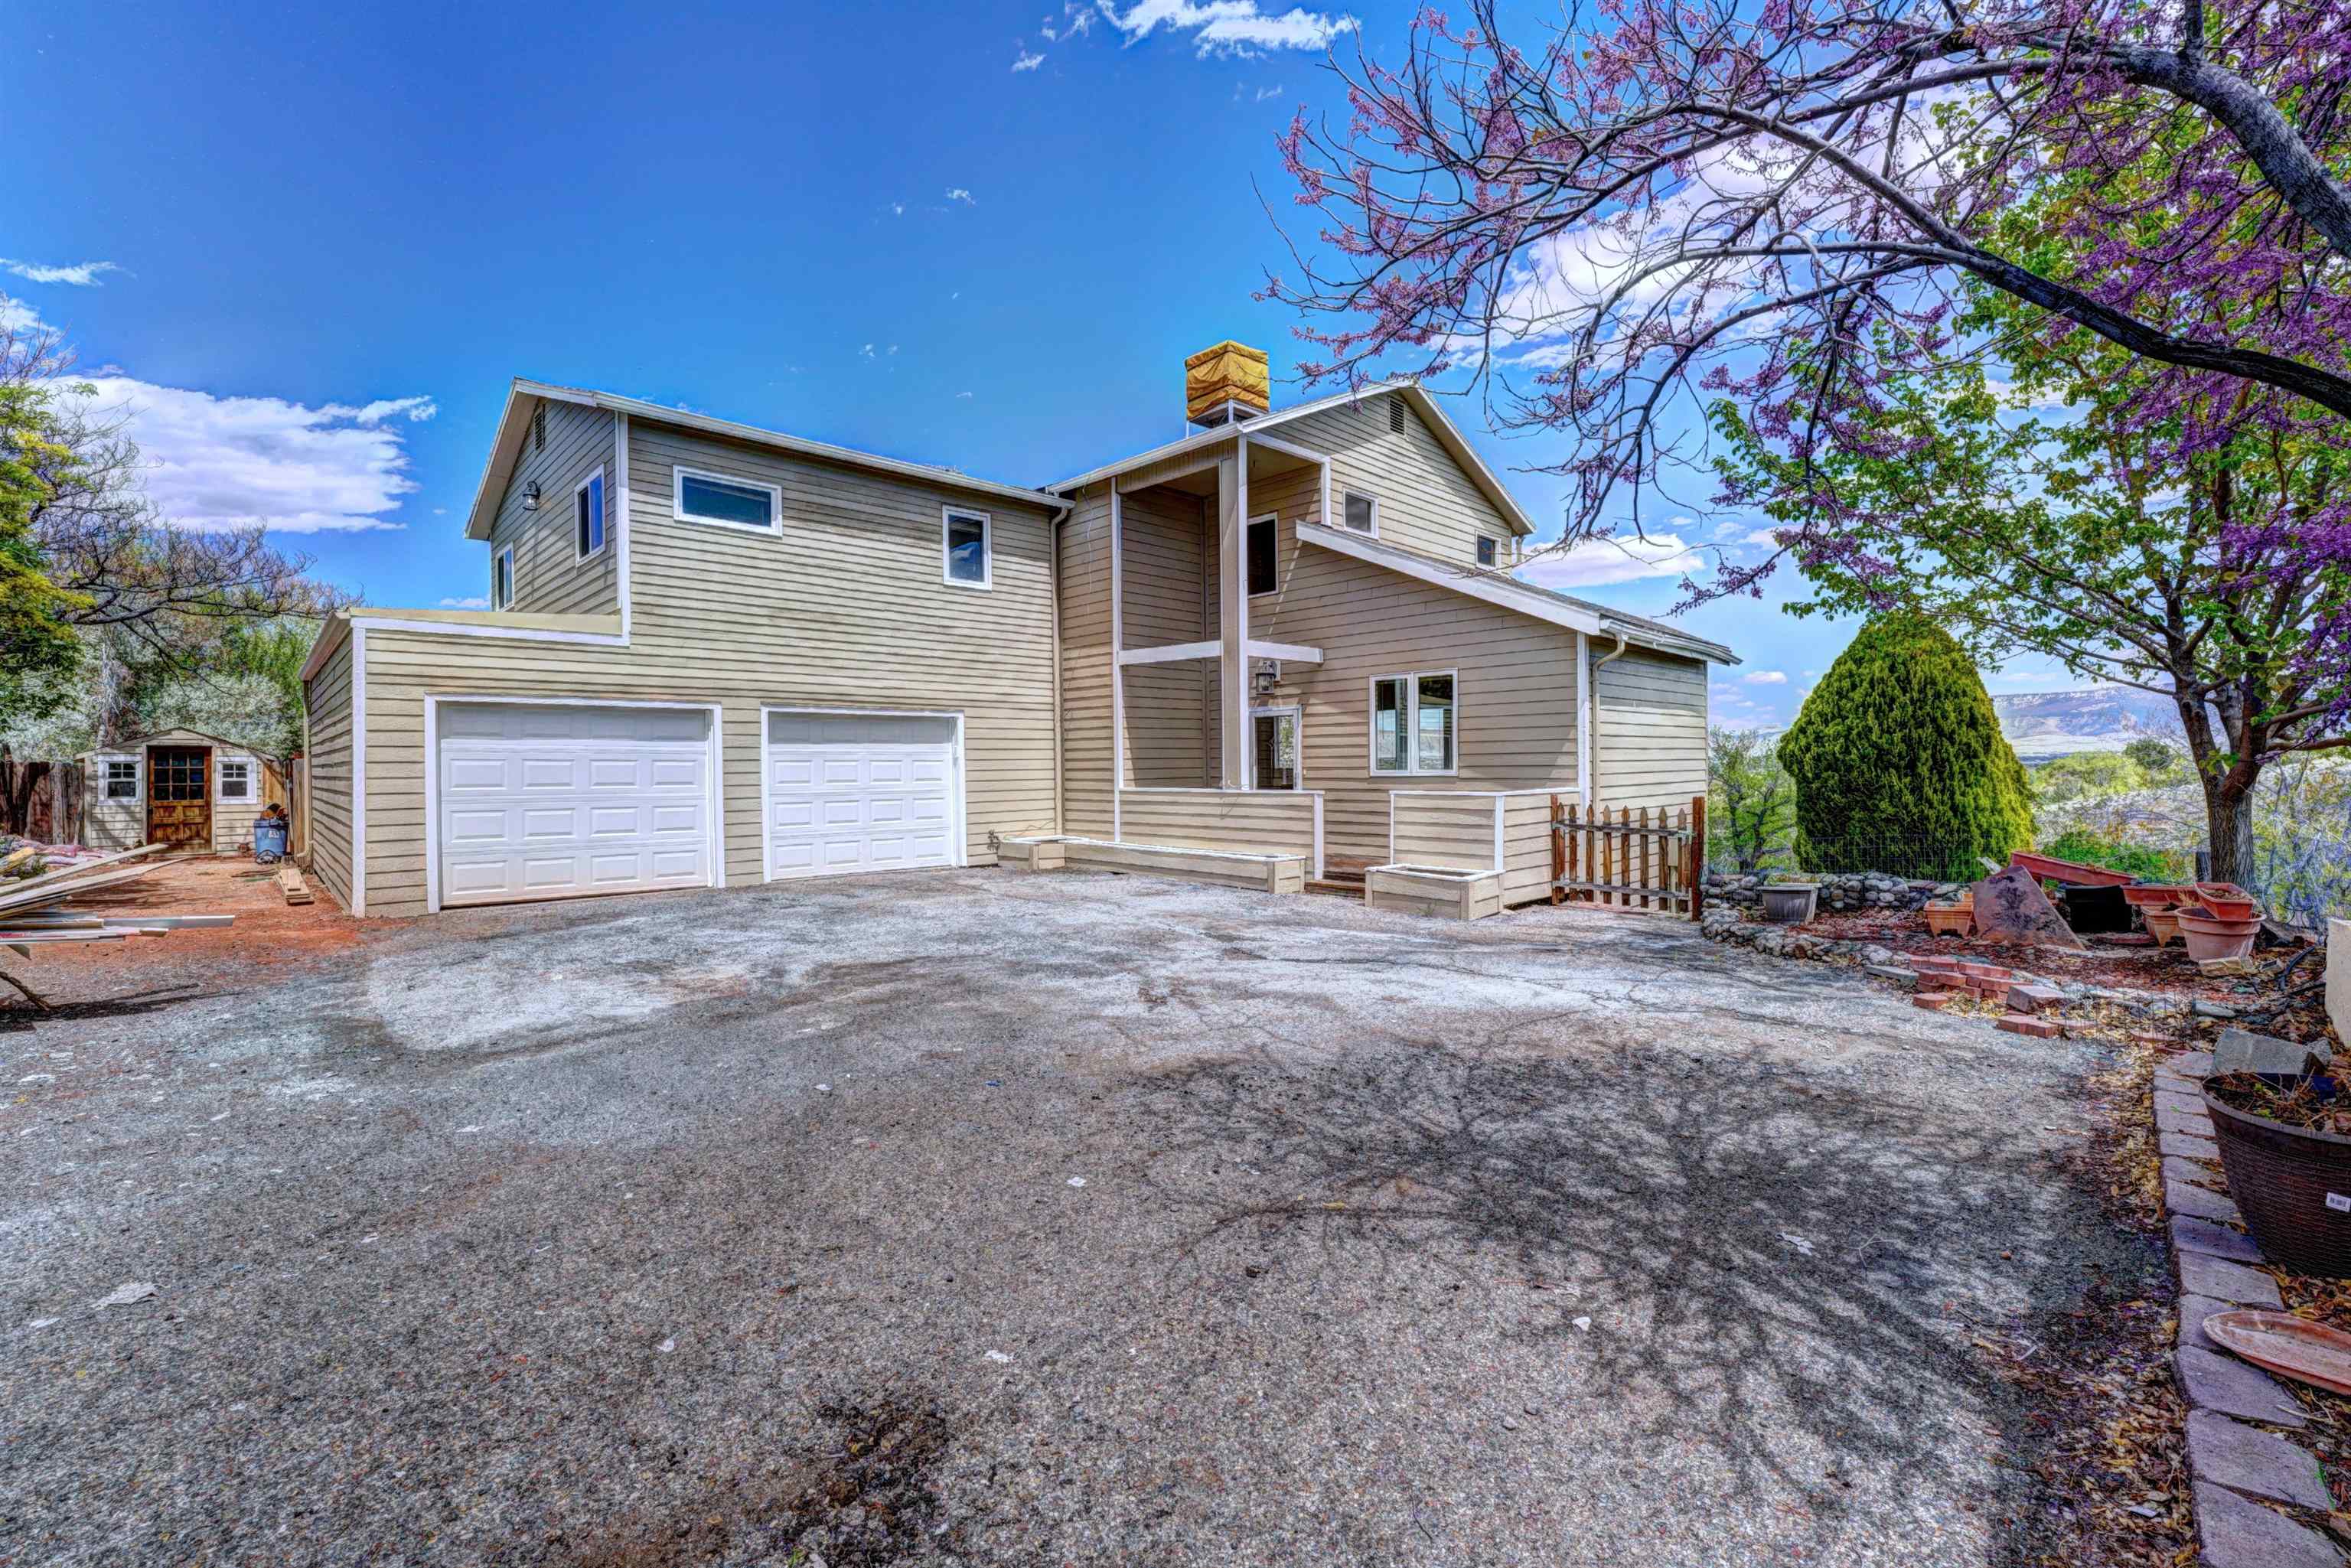 **Open House Friday April 26th from 3-6 PM **Step into your next home with this great 5-bedroom, 2.5-bath home, spanning over 3,300 square feet in the Ridges neighborhood. Freshly painted inside and out, this residence has beautiful unobstructed views of the Book Cliffs, Mount Garfield, Grand Mesa, and twinkling city lights at night. The living area has high ceilings with abundant natural light creating the perfect place to entertain. The fully finished basement offers the perfect arrangement for multigenerational living, with a kitchenette and private deck.   Equipped with a newer roof and backed by a comprehensive pre-inspection, this home is VERIFIED and includes a 12-month home warranty at closing.